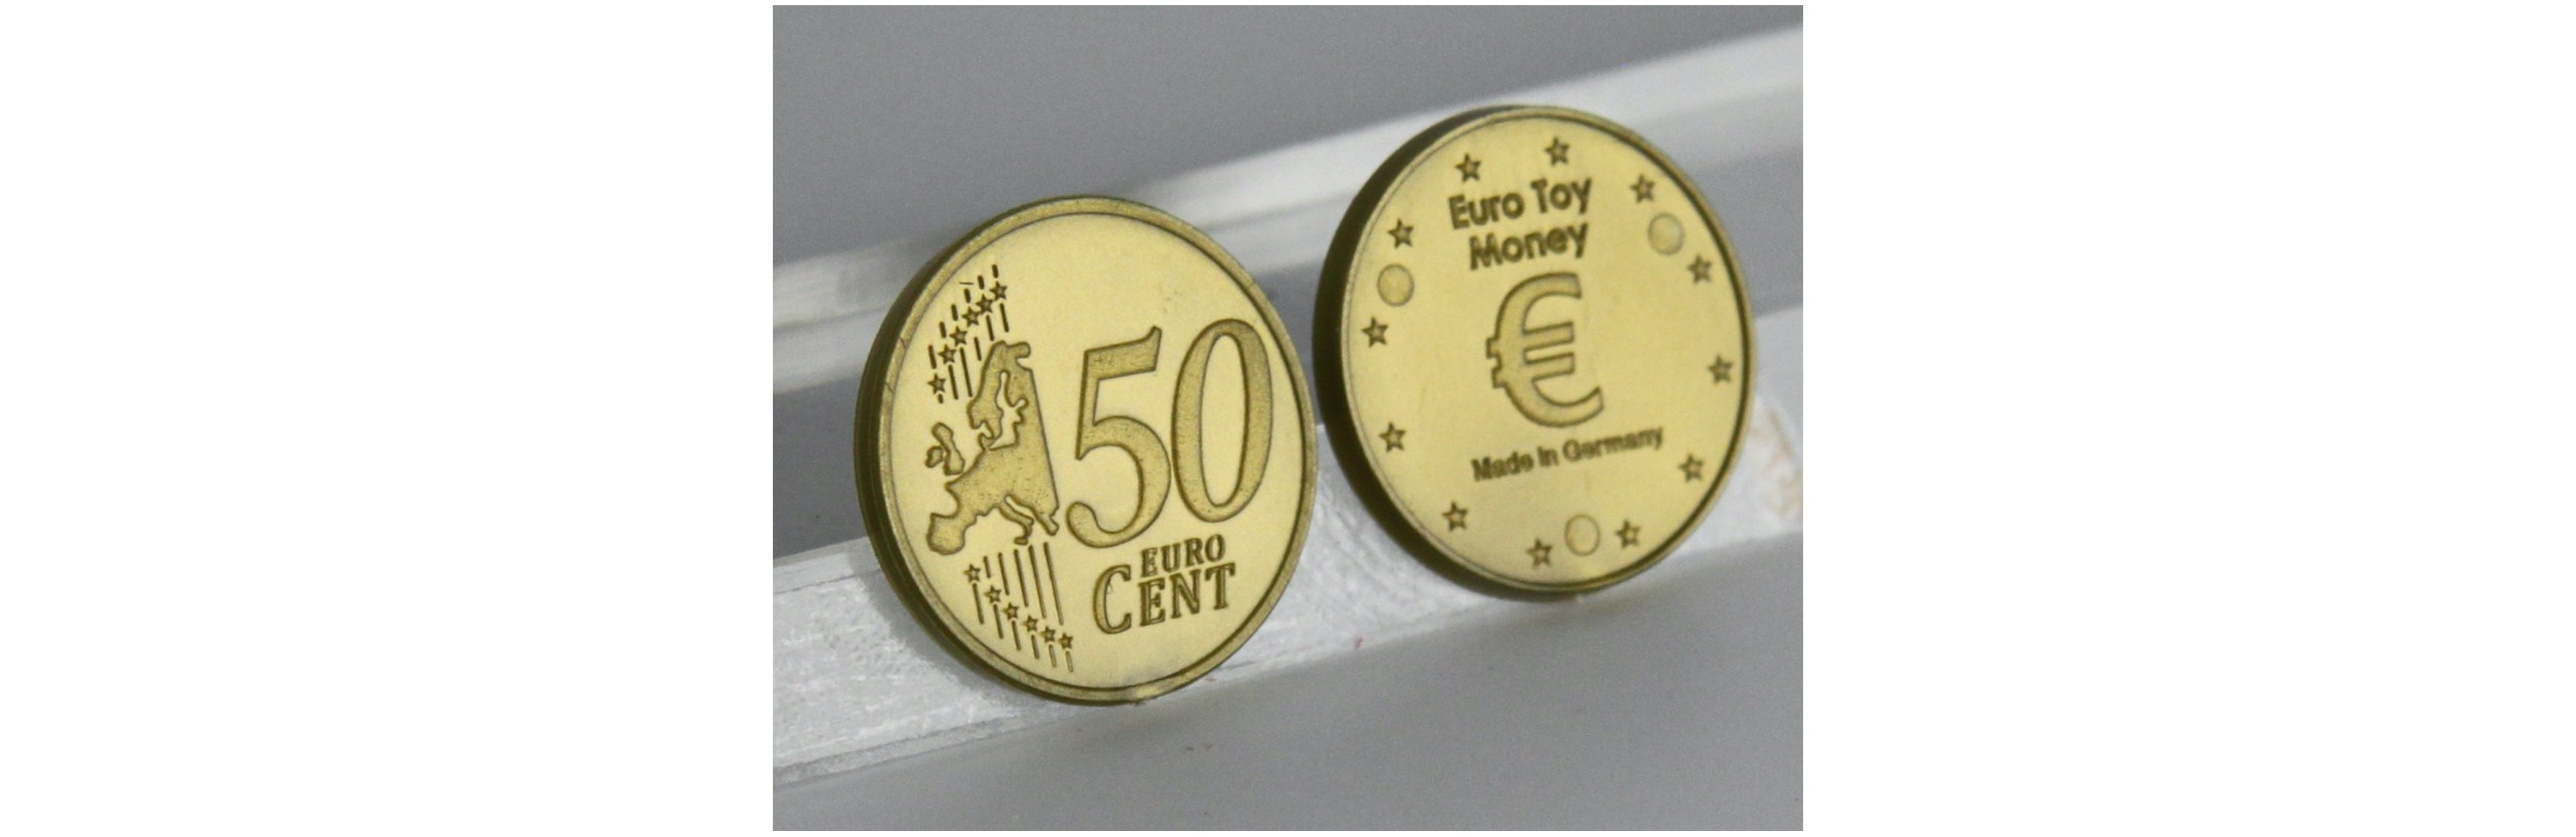 Wissner® active learning - 50 Euro - Cent (100 pcs) RE-Plastic®